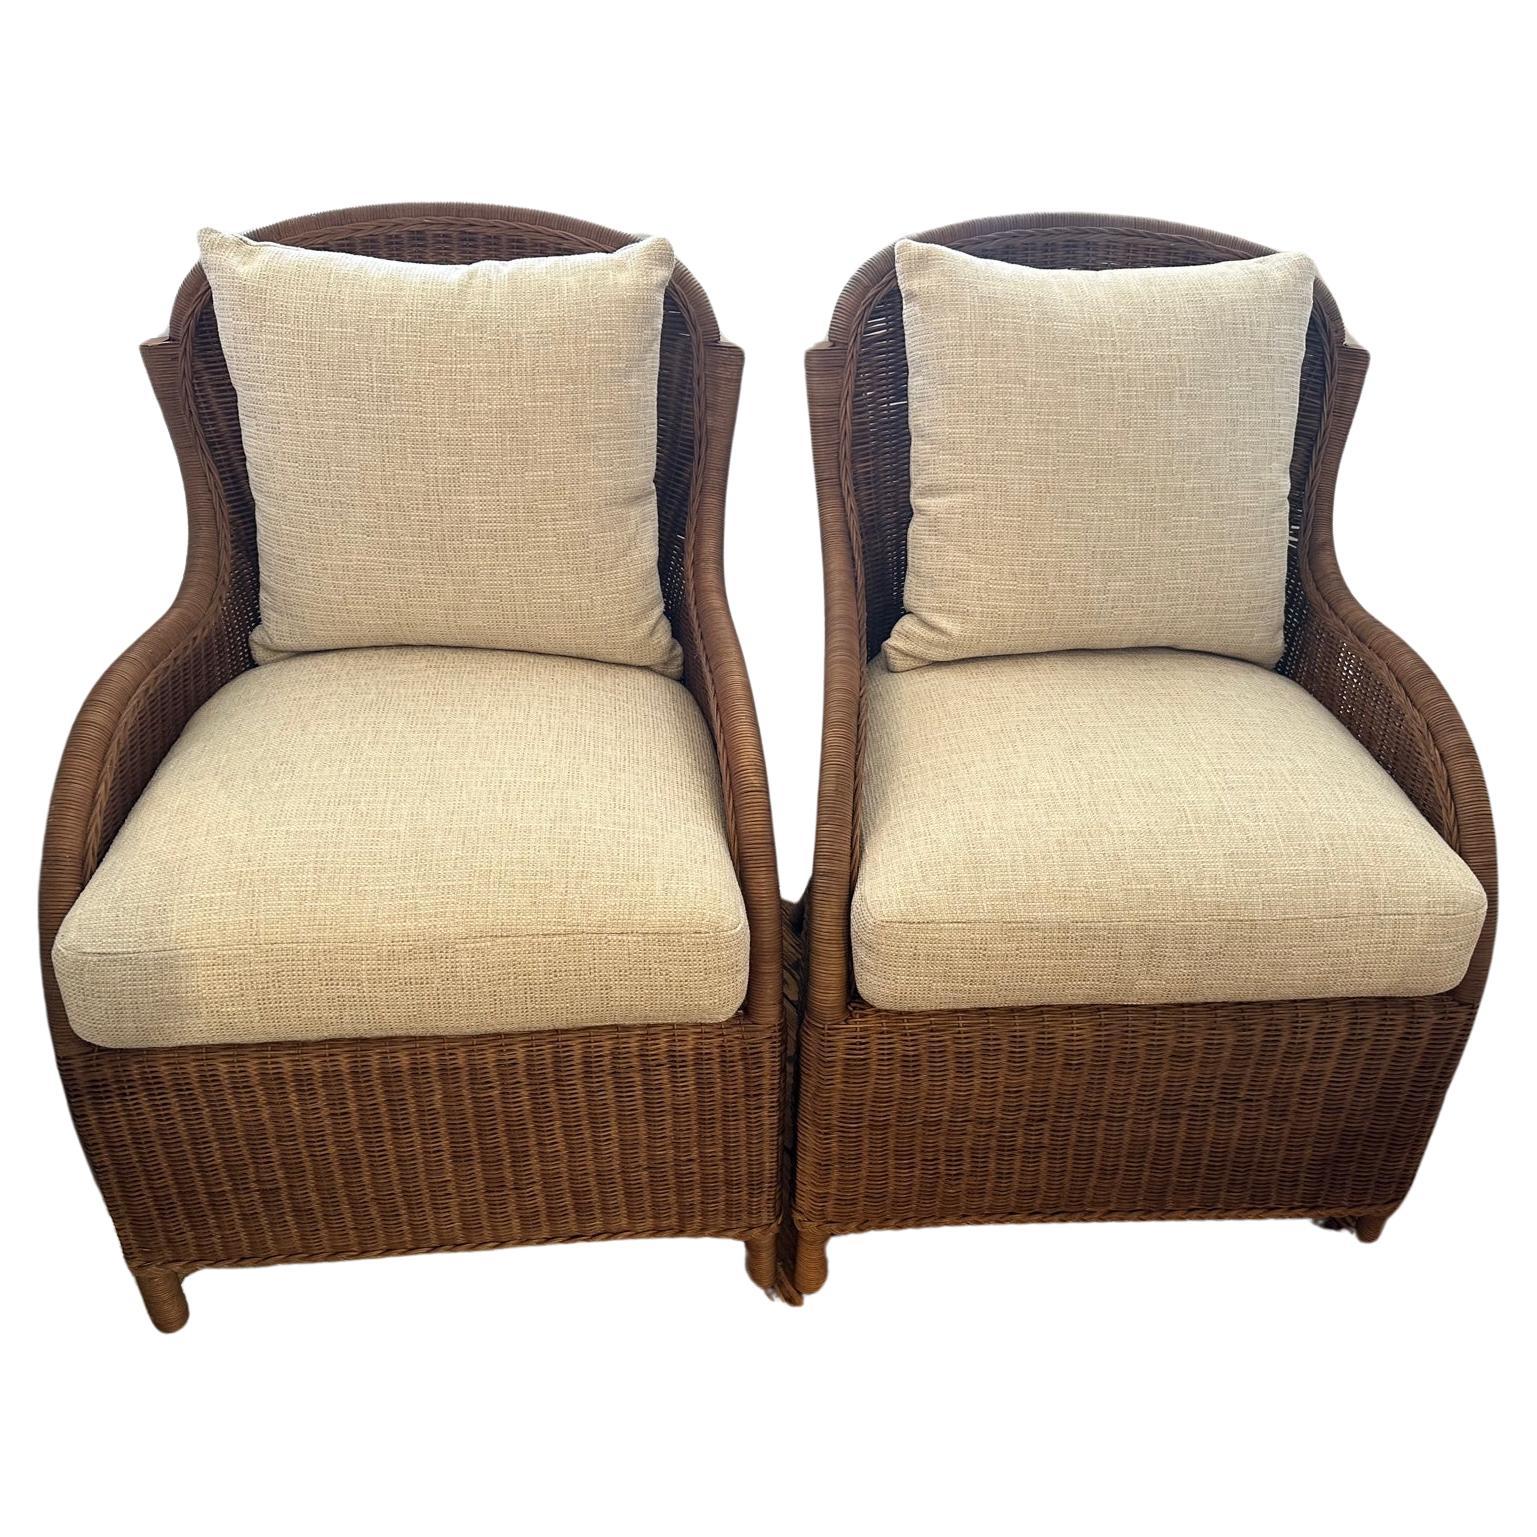 Pair of E J Victor Brown Wicker and Neutral Upholstered Seat & Back Cushions